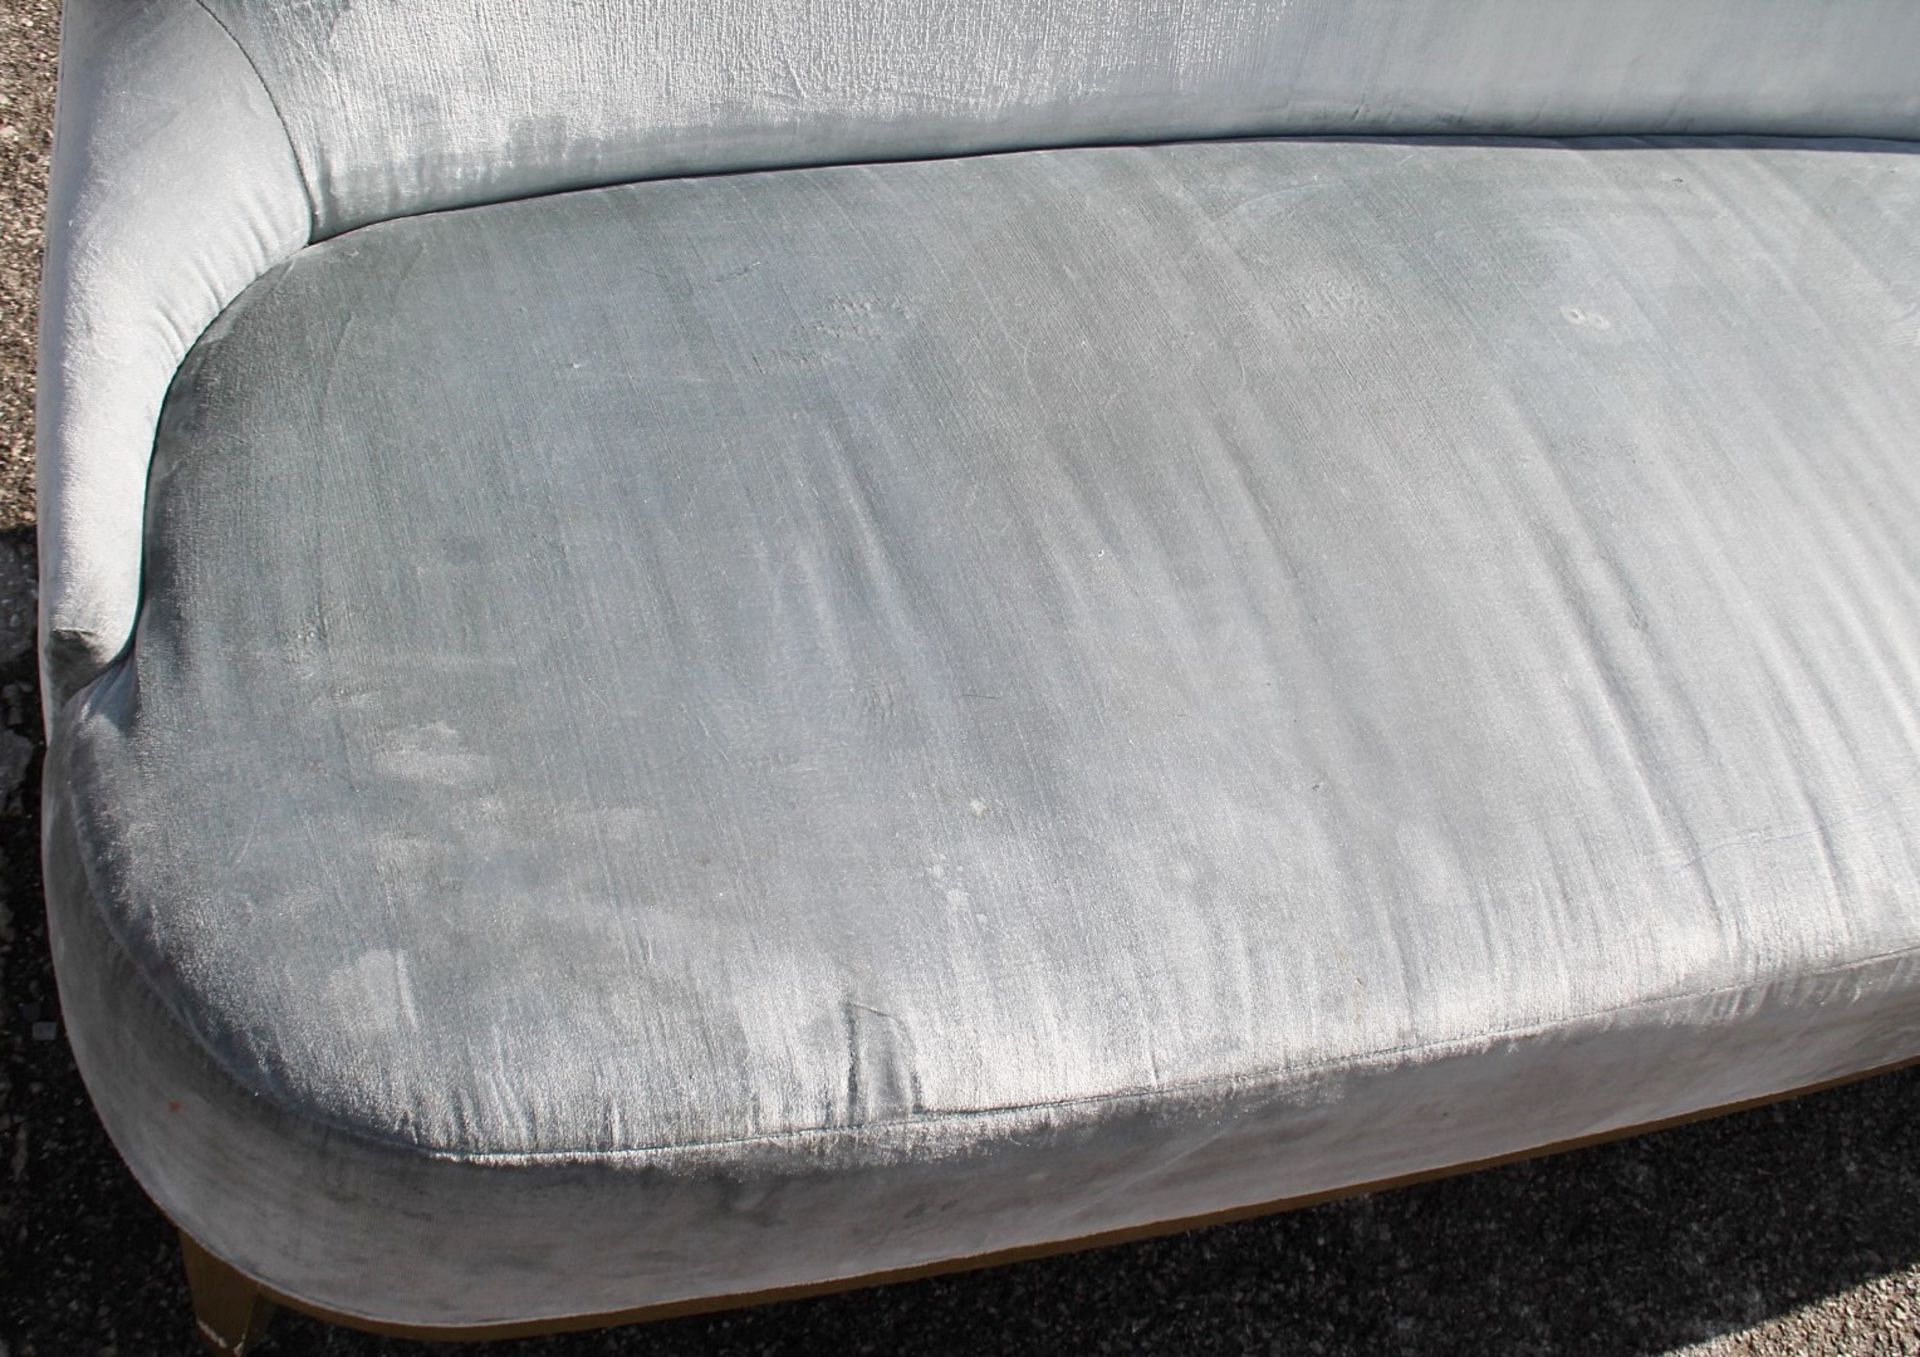 1 x Opulent Velvet Upholstered Sofa In Blue-Silver Tone With A Curved Base In Gold - Image 10 of 13